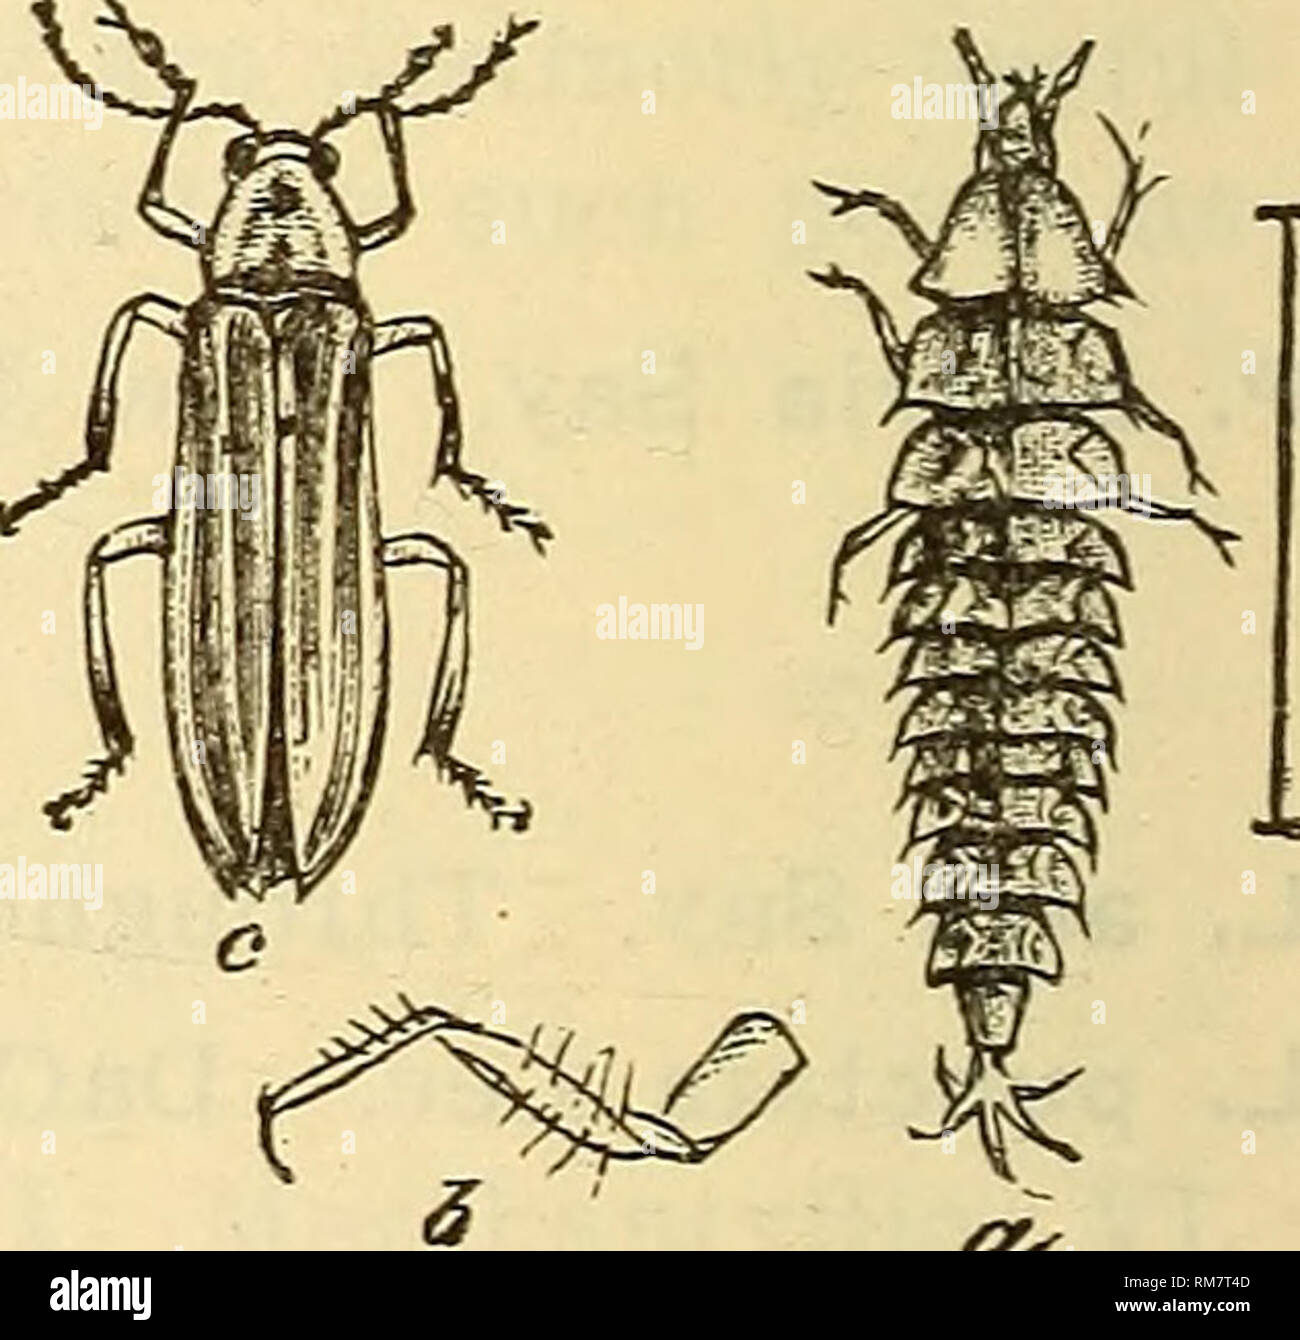 . Annual report, including a report of the insects of New Jersey, 1909. P. consanguineus Lee. son Co. (LI); Orange Mts. and Newark Dist. (div); Anglesea (W) d. (Li). P. lineellus Lee. Orange (Ch); Atco (Li); rare. P. pyralis Linn. Piedmont plain and northward, in June; a moderate-sized species with quite a bright light. P. marginellus Lee. Throughout the State VI, VII; locally the most common form.; flies low and has a yellow light. The female is half- winged and does not fly. P. scintillans Say. Throughout the State, usually the most common form; flies VI, lingers until VIII; habits and light Stock Photo